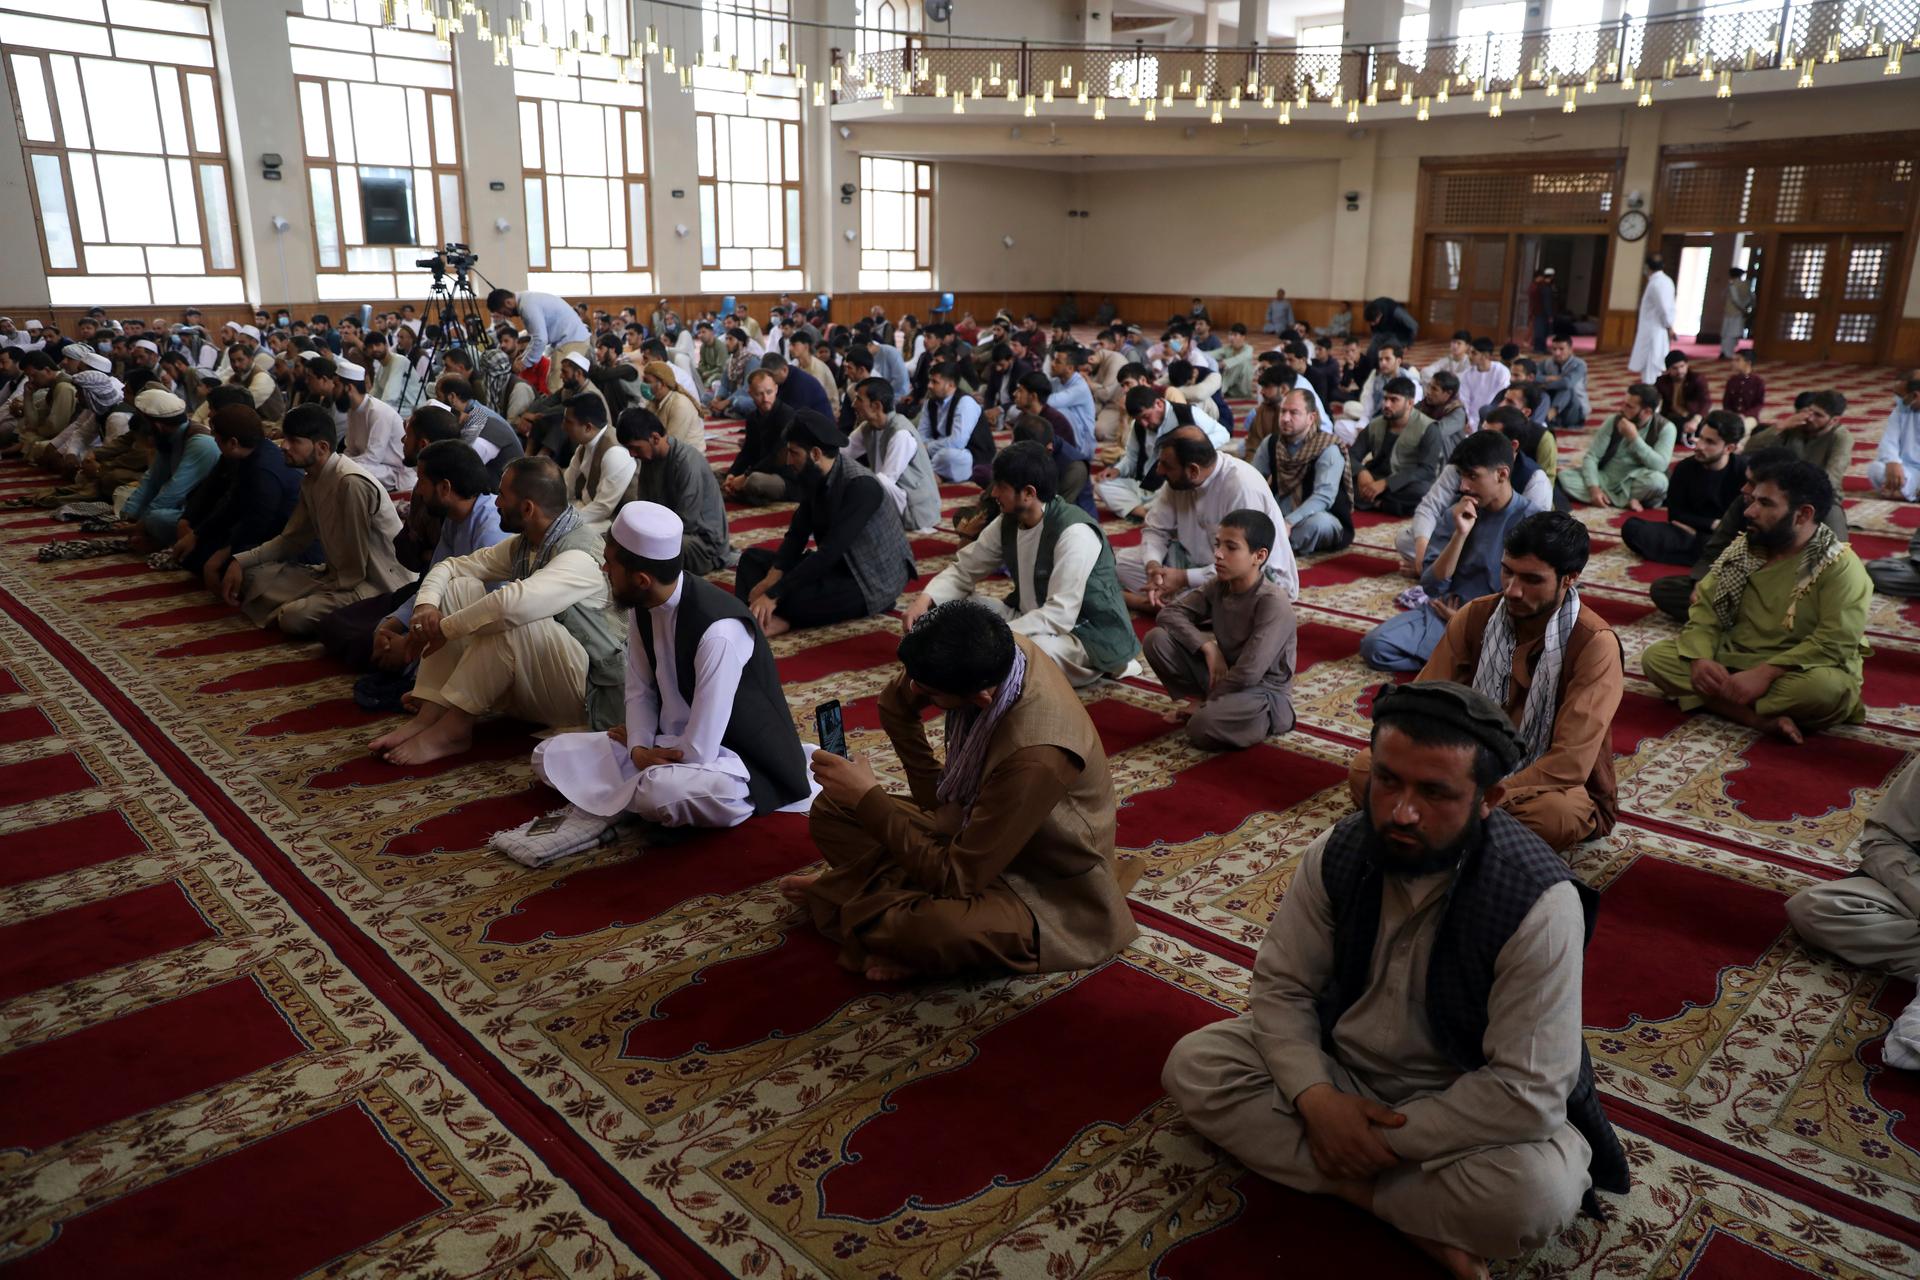 Muslims offer Eid al-Adha prayers in Kabul, Afghanistan, July 20, 2021. Eid al-Adha, or "Feast of the Sacrifice," commemorates the Quranic tale of Prophet Ibrahim's willingness to sacrifice his son as an act of obedience to God.